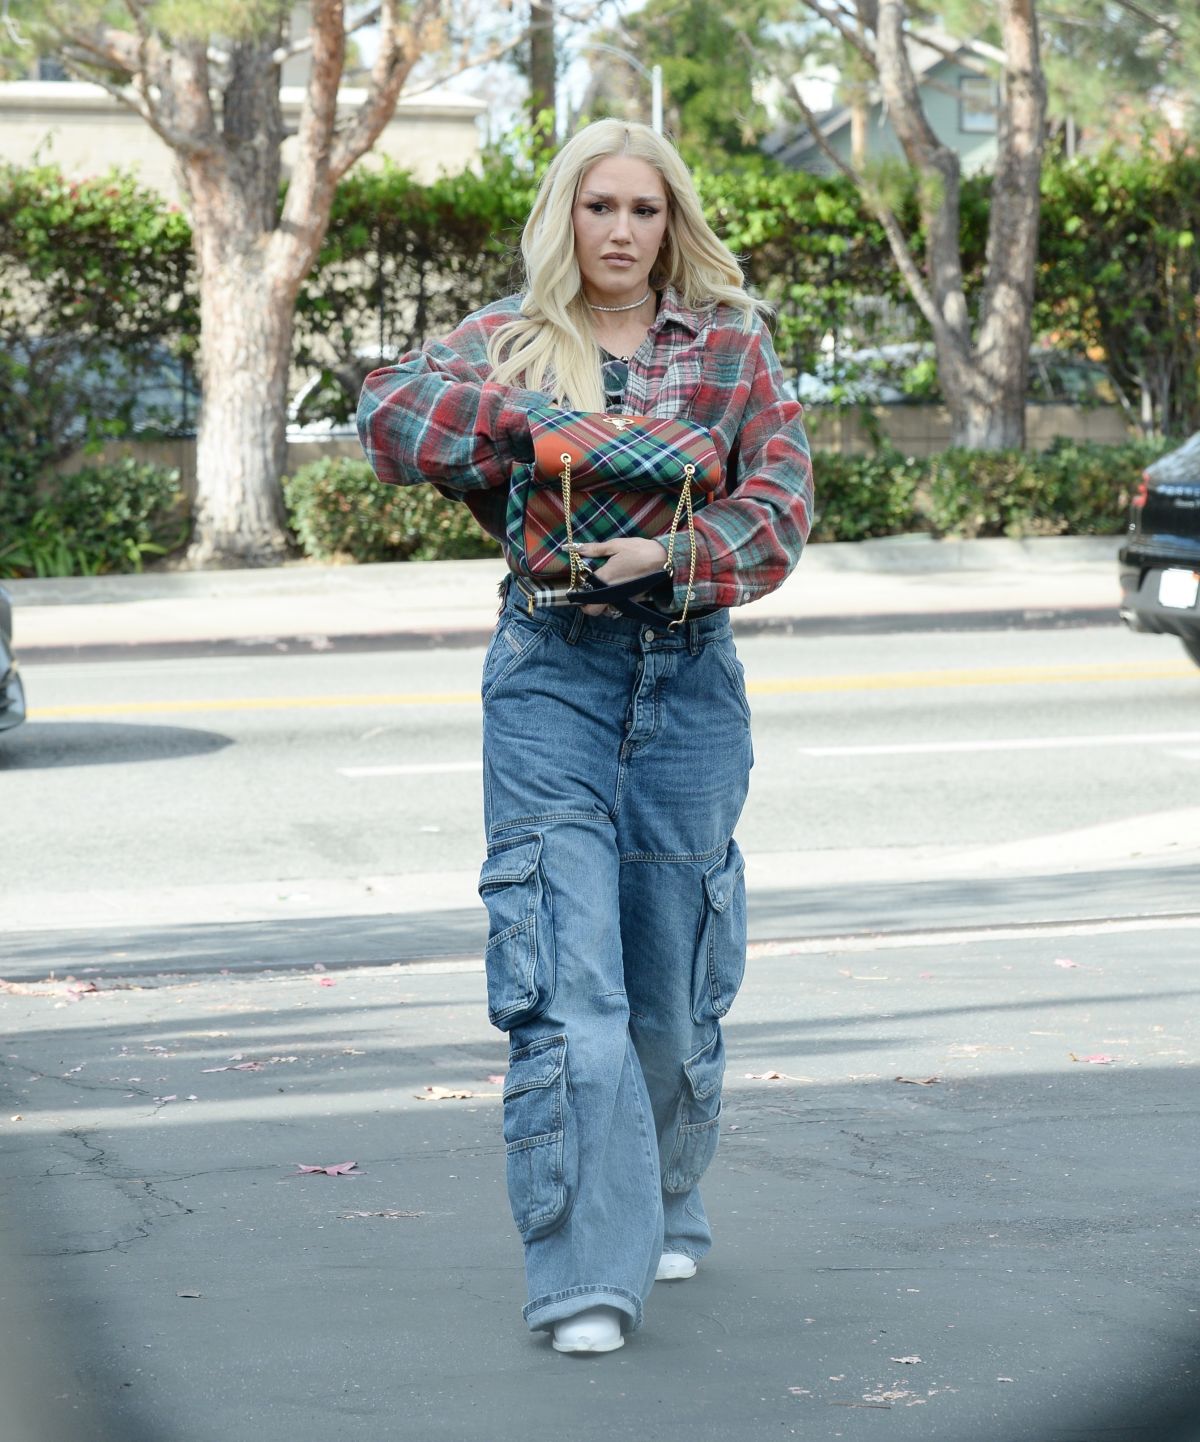 Gwen Stefani in Casual Checked Shirt and Denim in Los Angeles